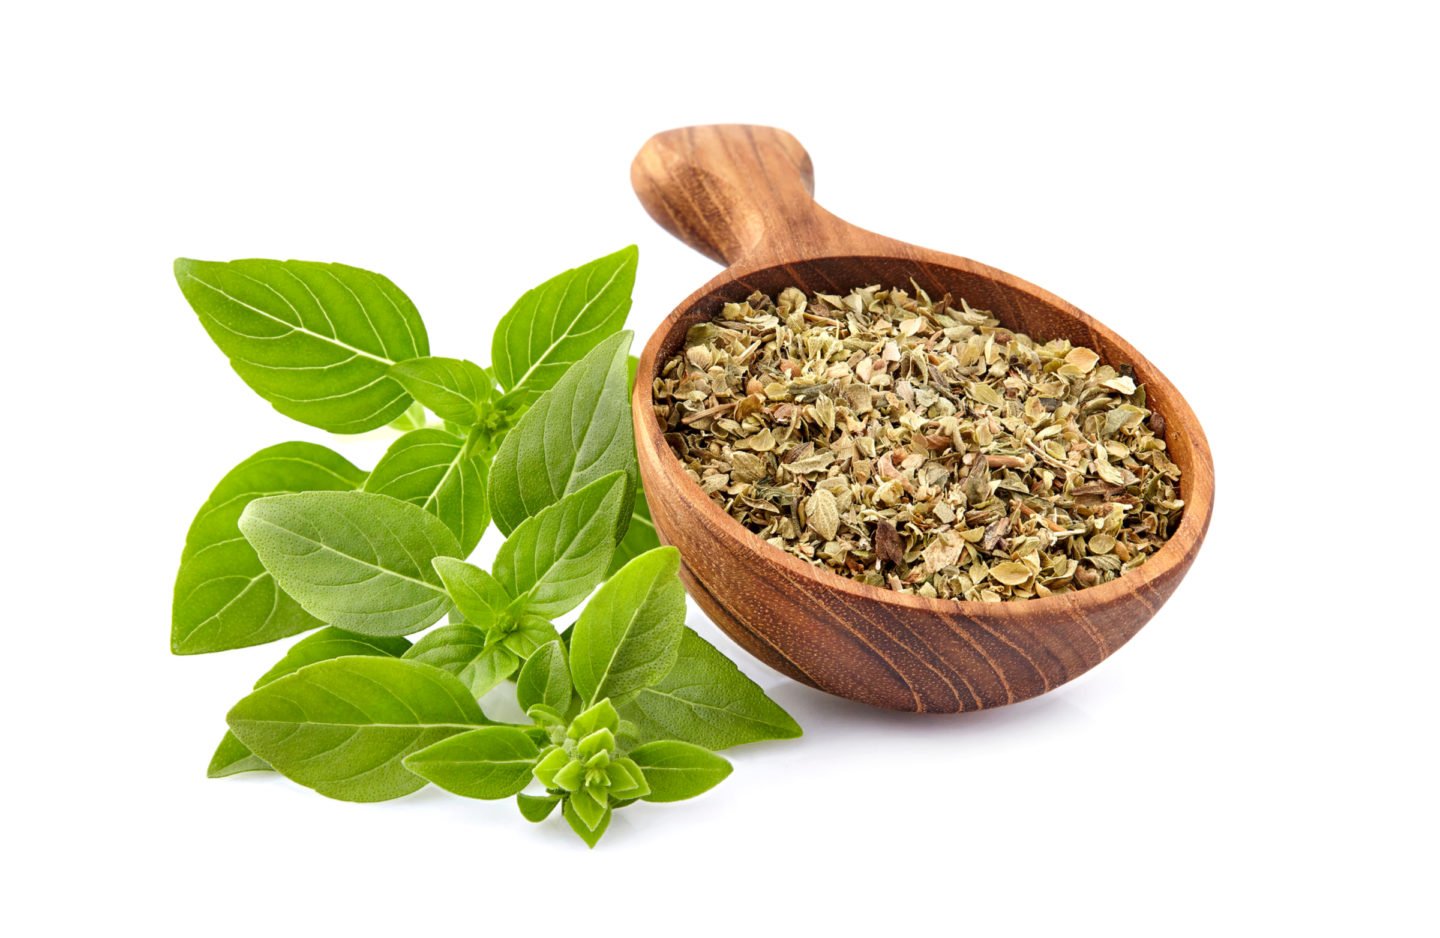 dried or fresh basil can be used as thyme substitute